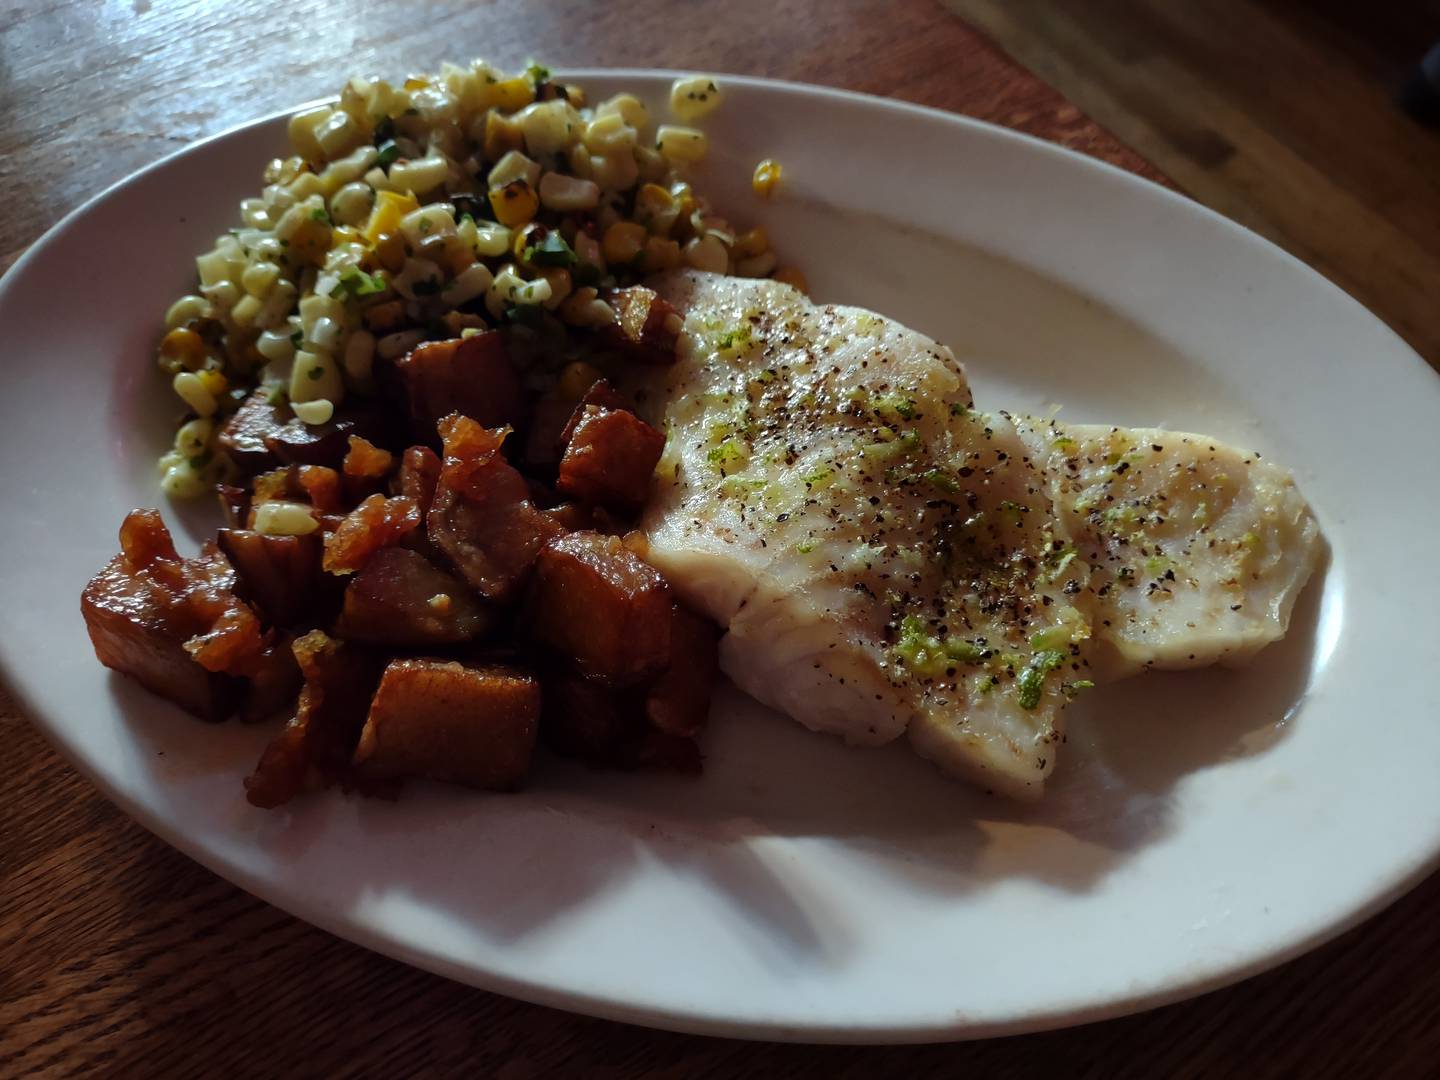 The broiled citrus and herb trigger fish at Canal Port in Utica is served with rosemary garlic red potatoes and southwest corn.